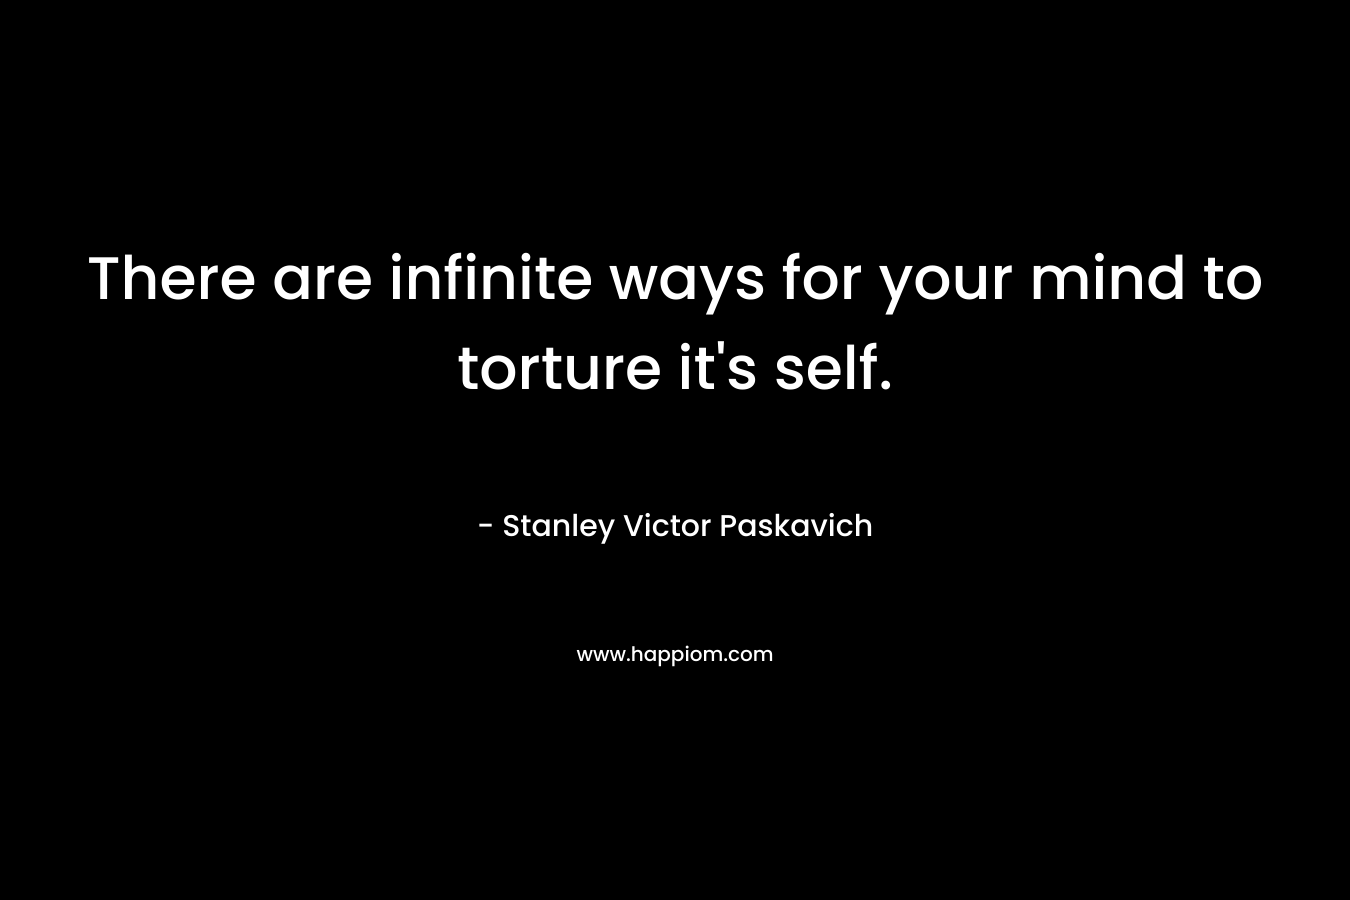 There are infinite ways for your mind to torture it's self.